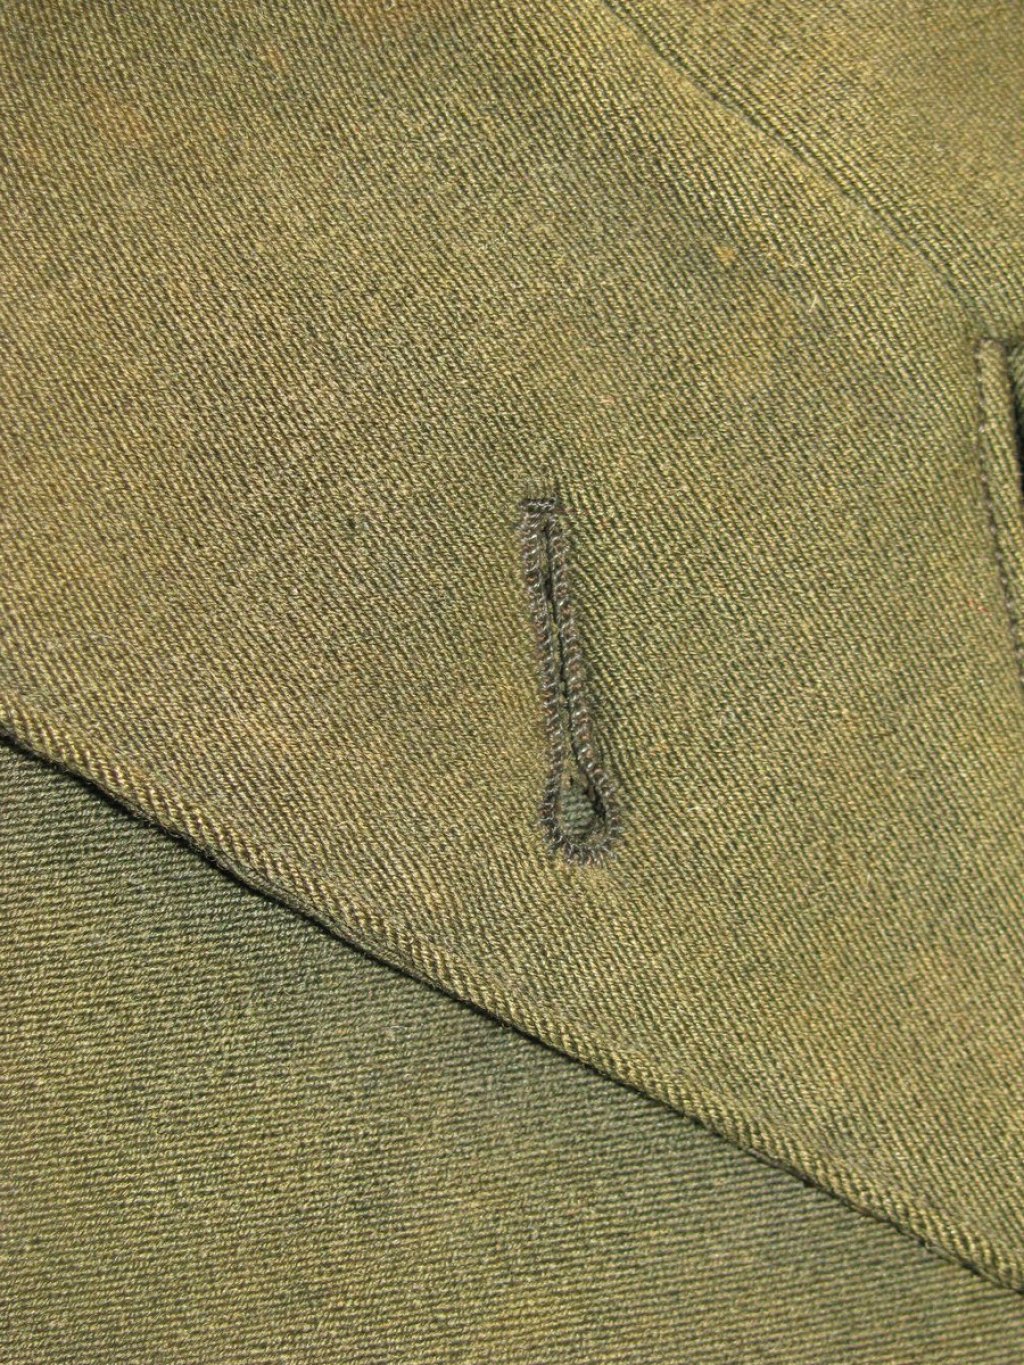 Early 20th century buttonhole in green wool.